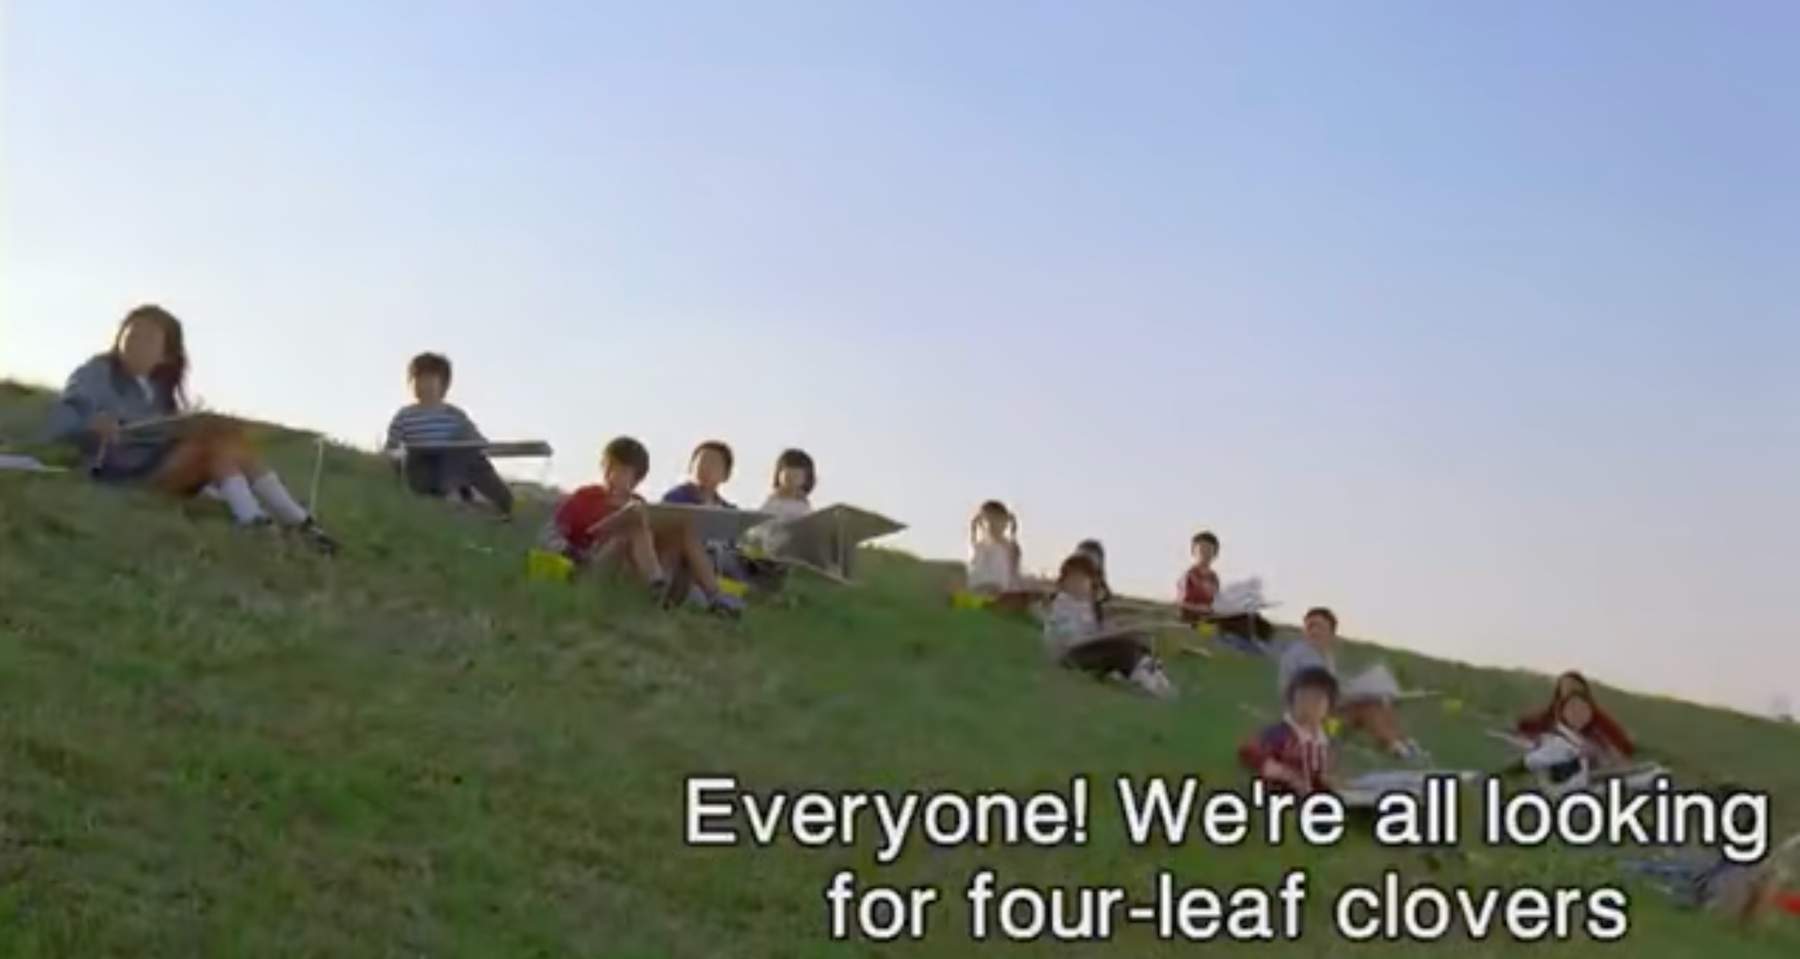 A screencap from Honey and Clove (2006) of children sitting on a grassy mound holding large sketchbooks as part of an art class. The subtitle at the bottom reads "Everyone! We're all looking for four-leaf clovers"